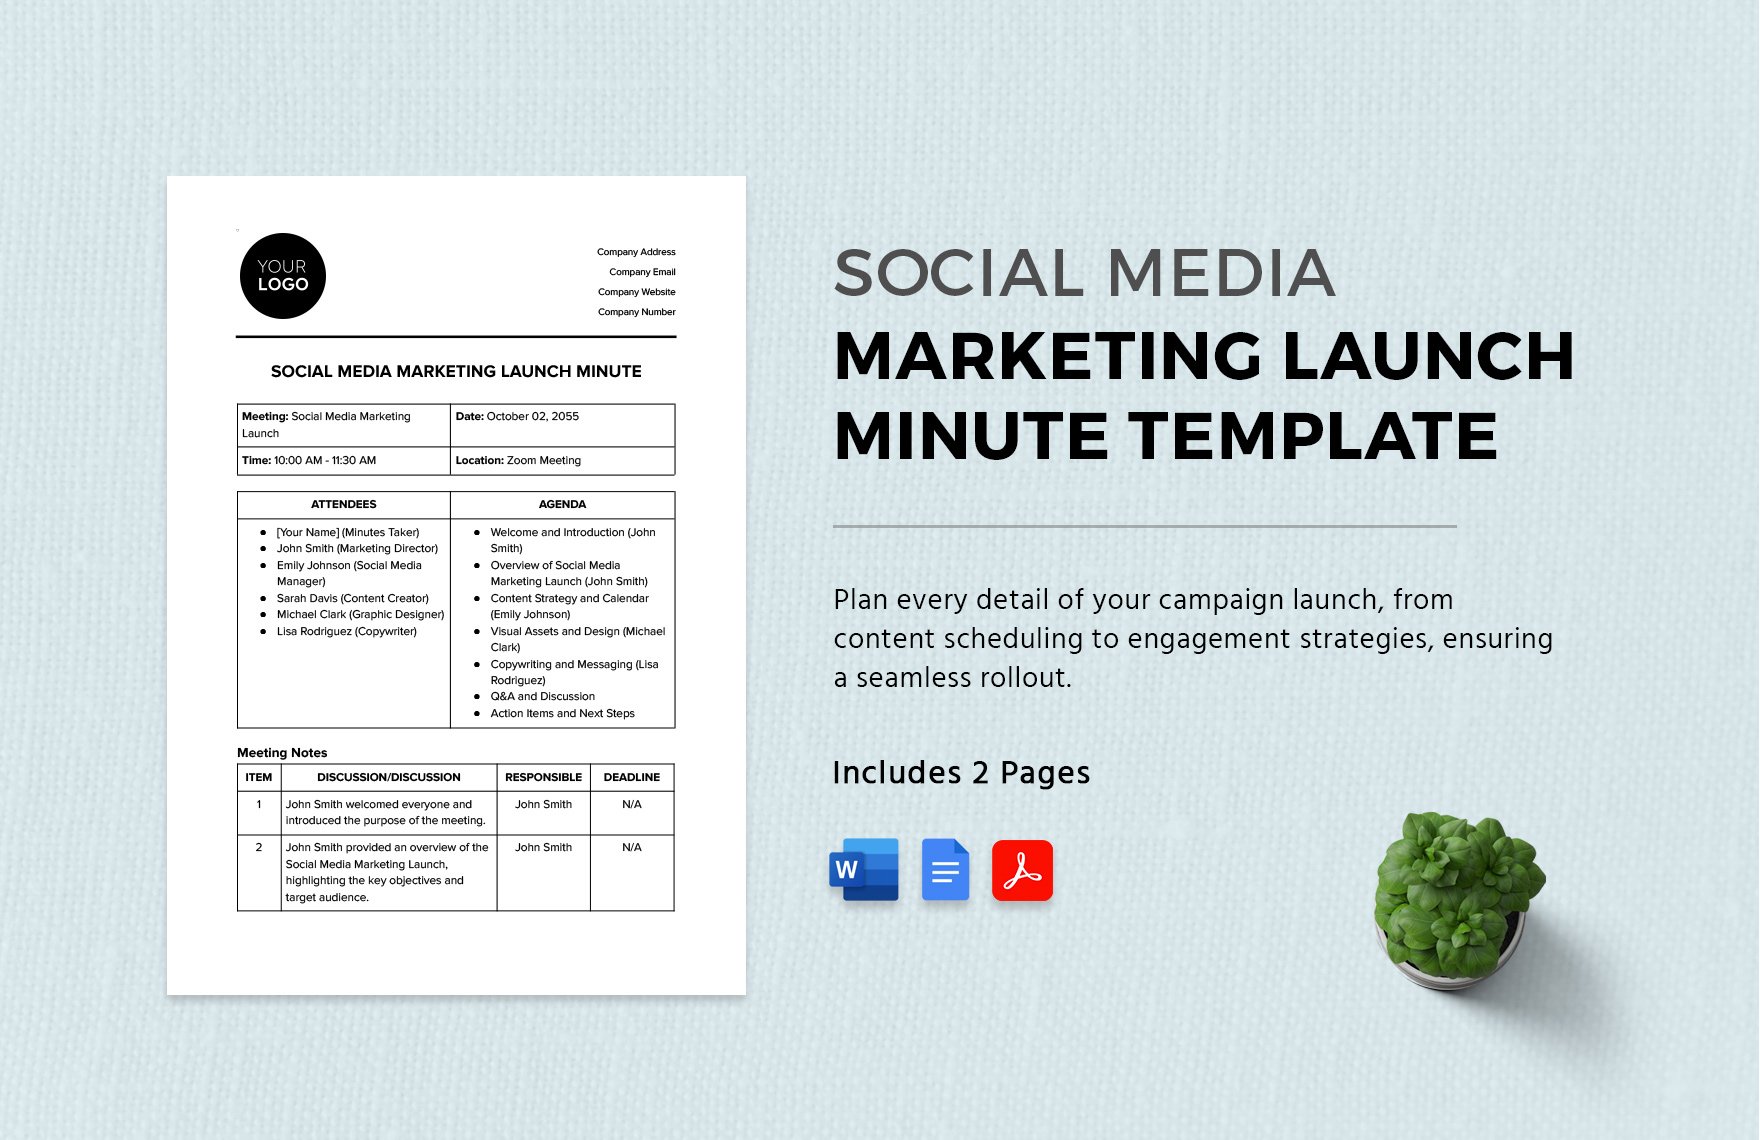 Social Media Marketing Launch Minute Template in Word, Google Docs, PDF